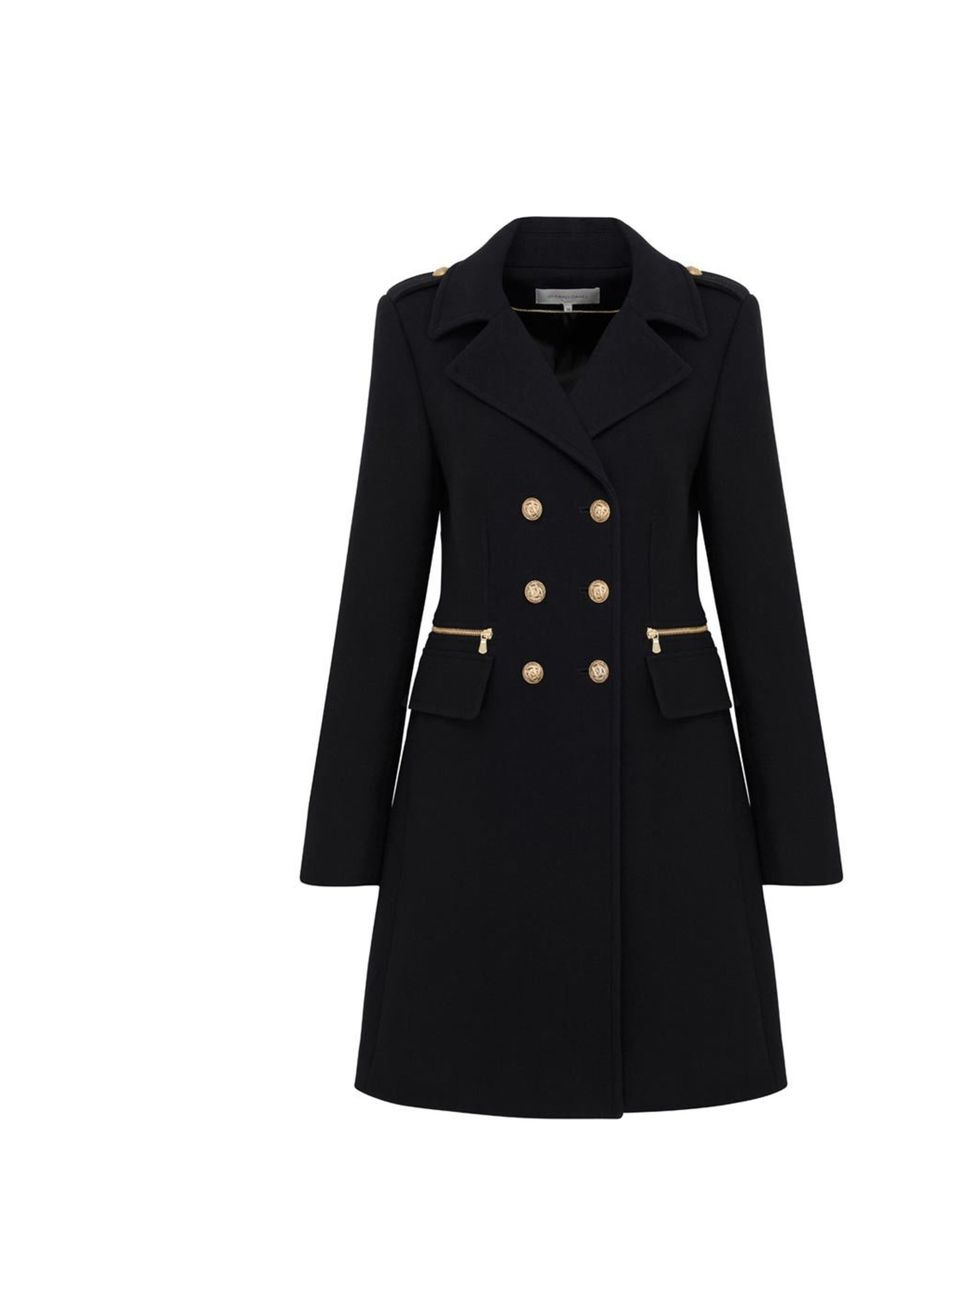 <p>Gerard Darel military jacket, £399, at Fenwick, for stockists call 0207 629 9161</p>